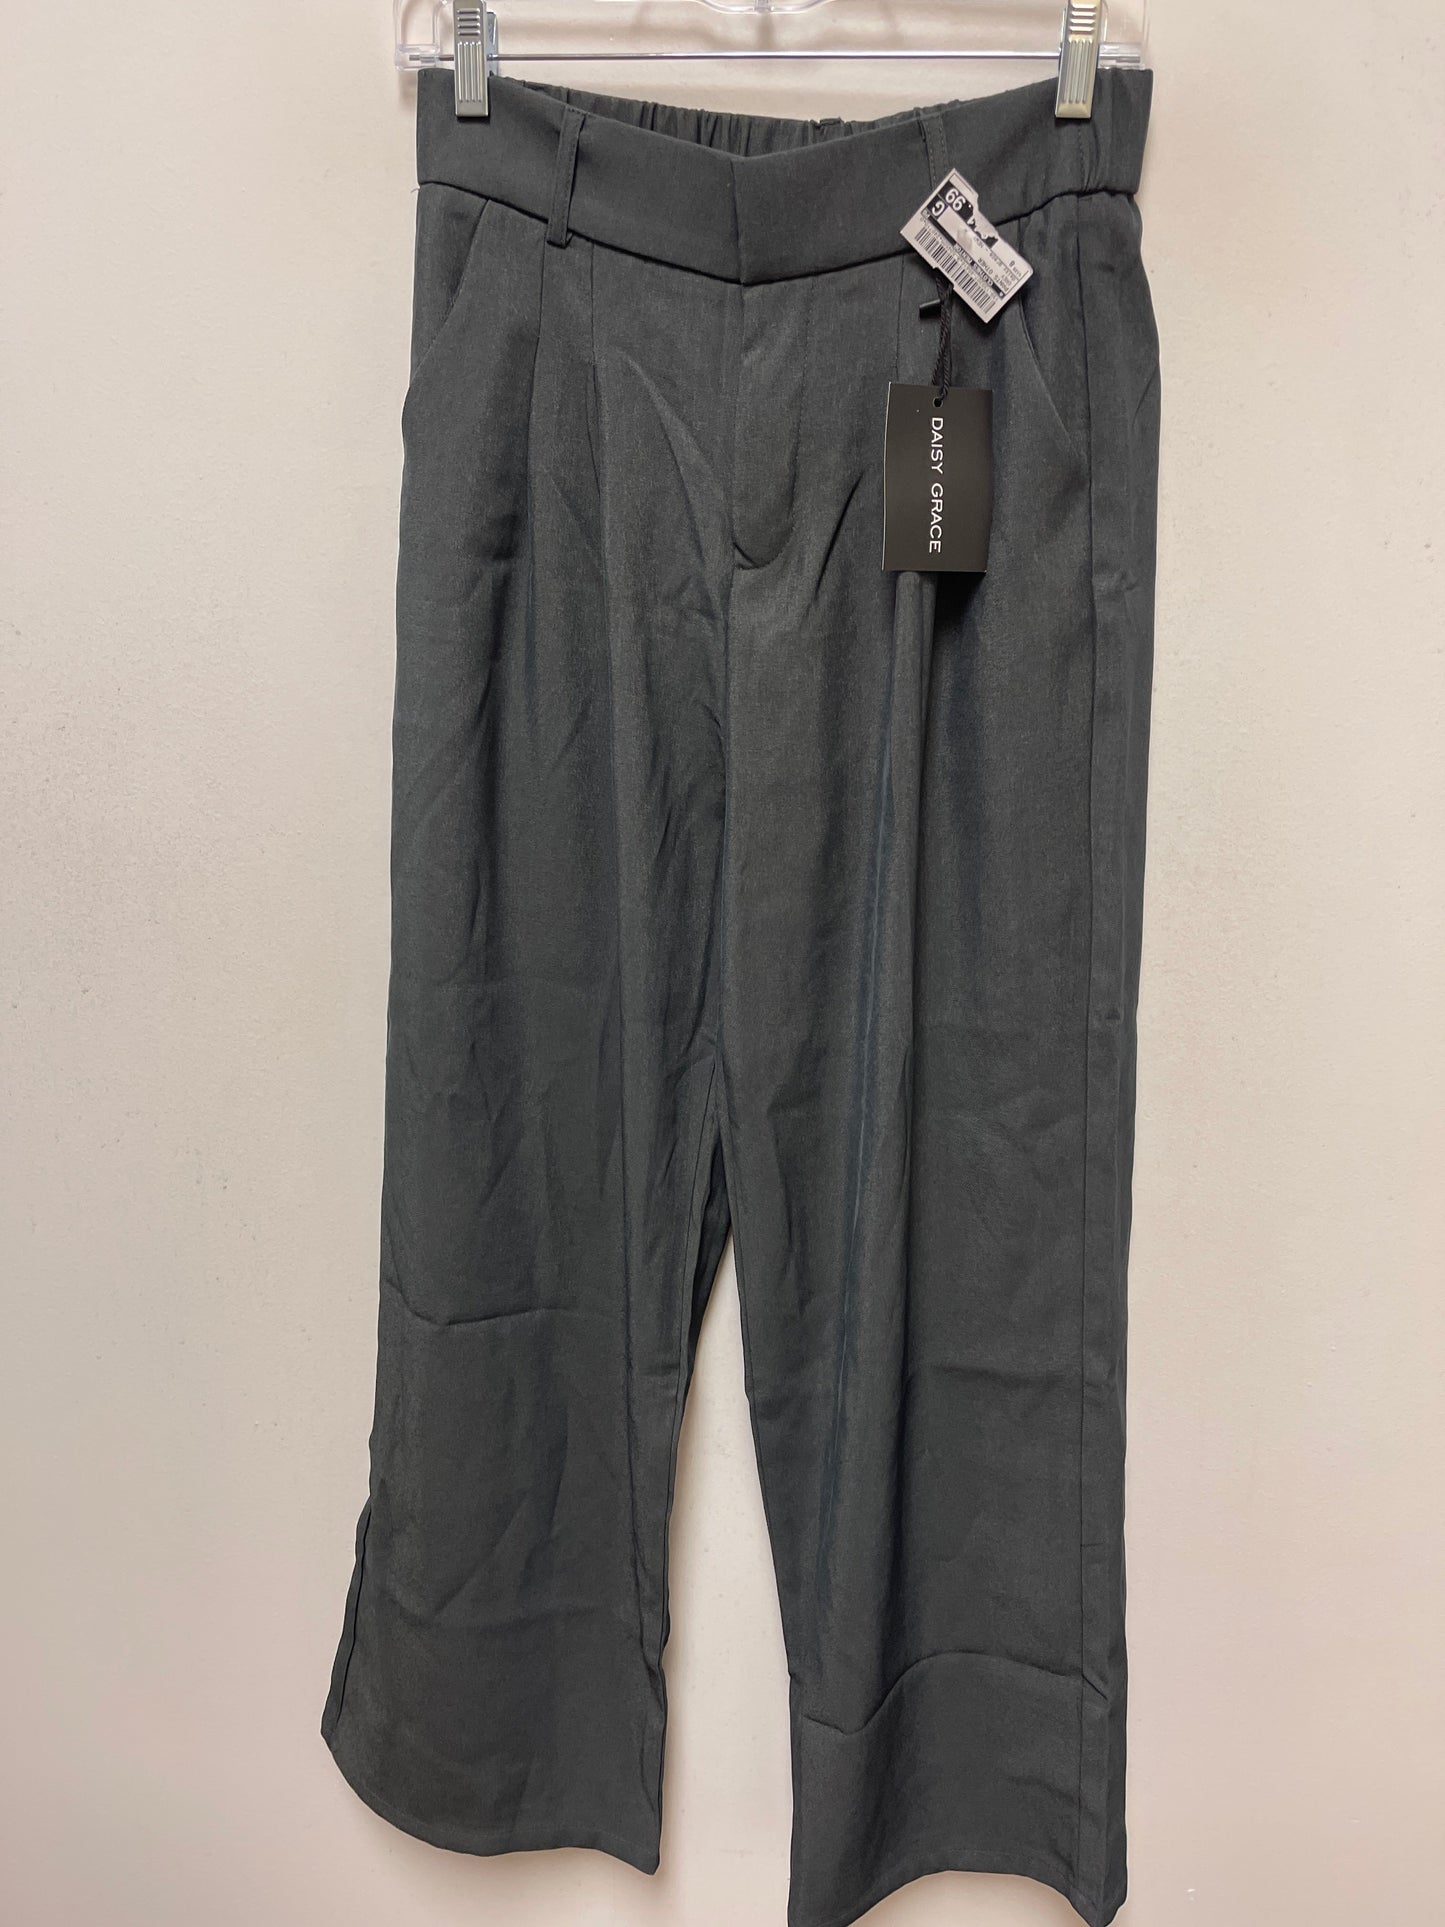 Grey Pants Other Clothes Mentor, Size 8